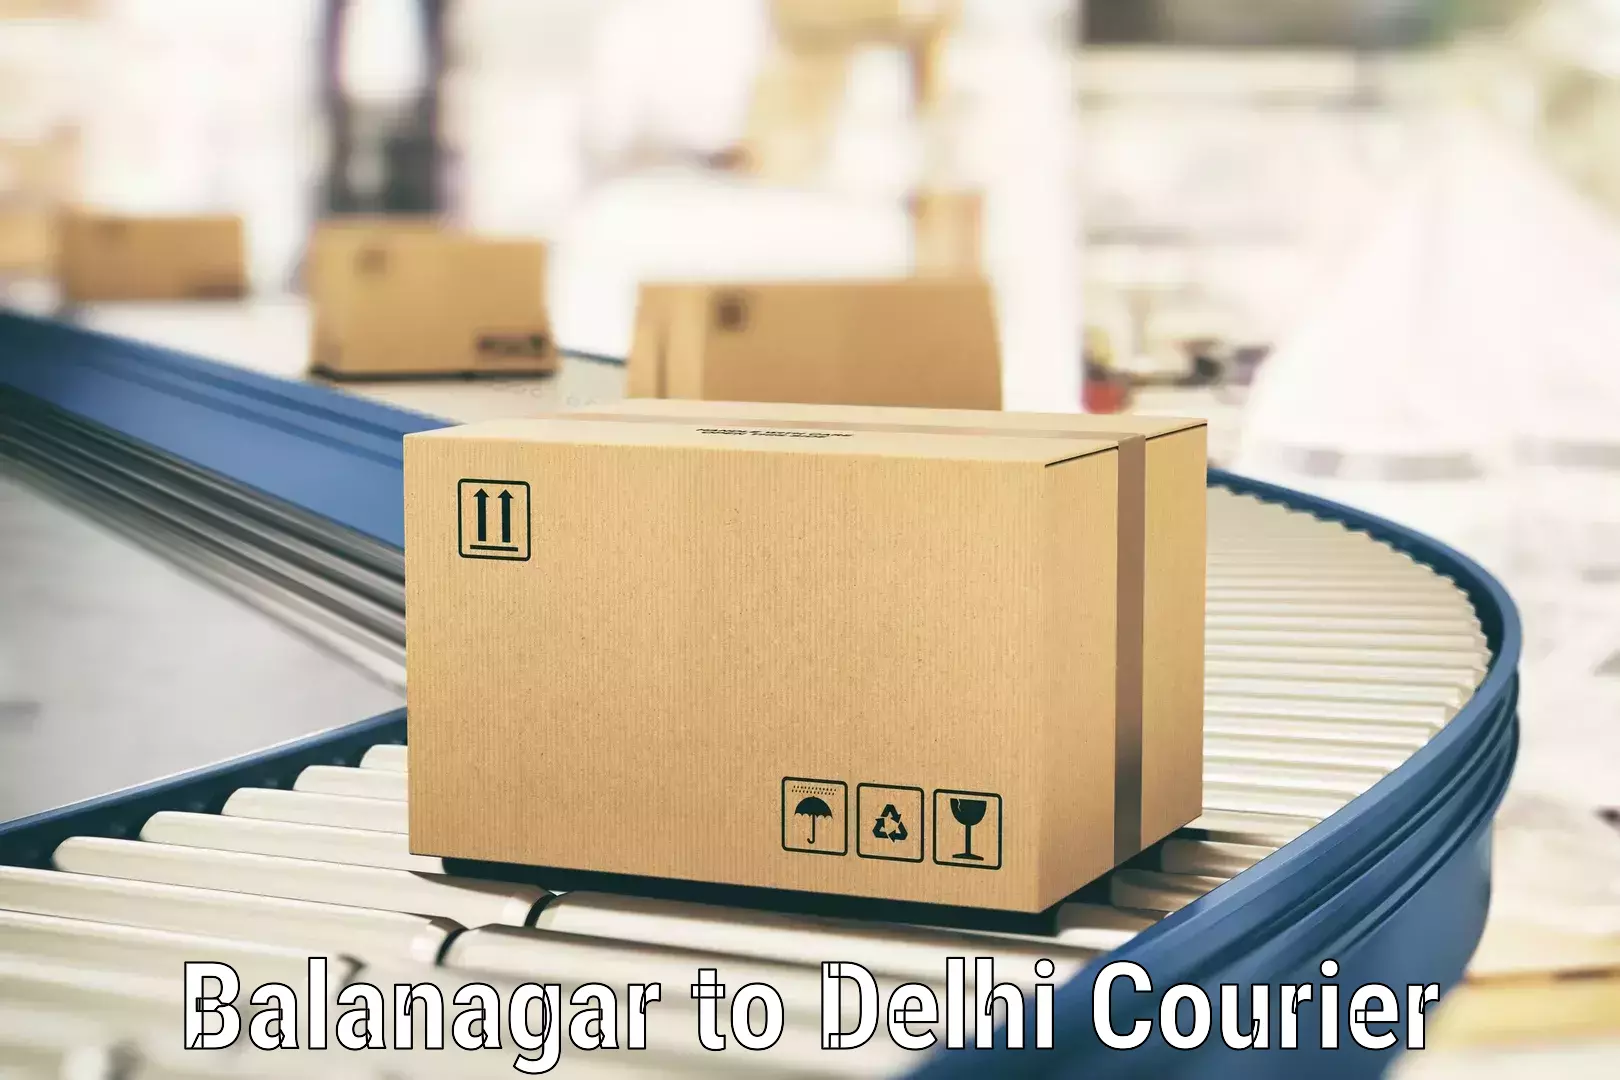 Express package delivery Balanagar to University of Delhi